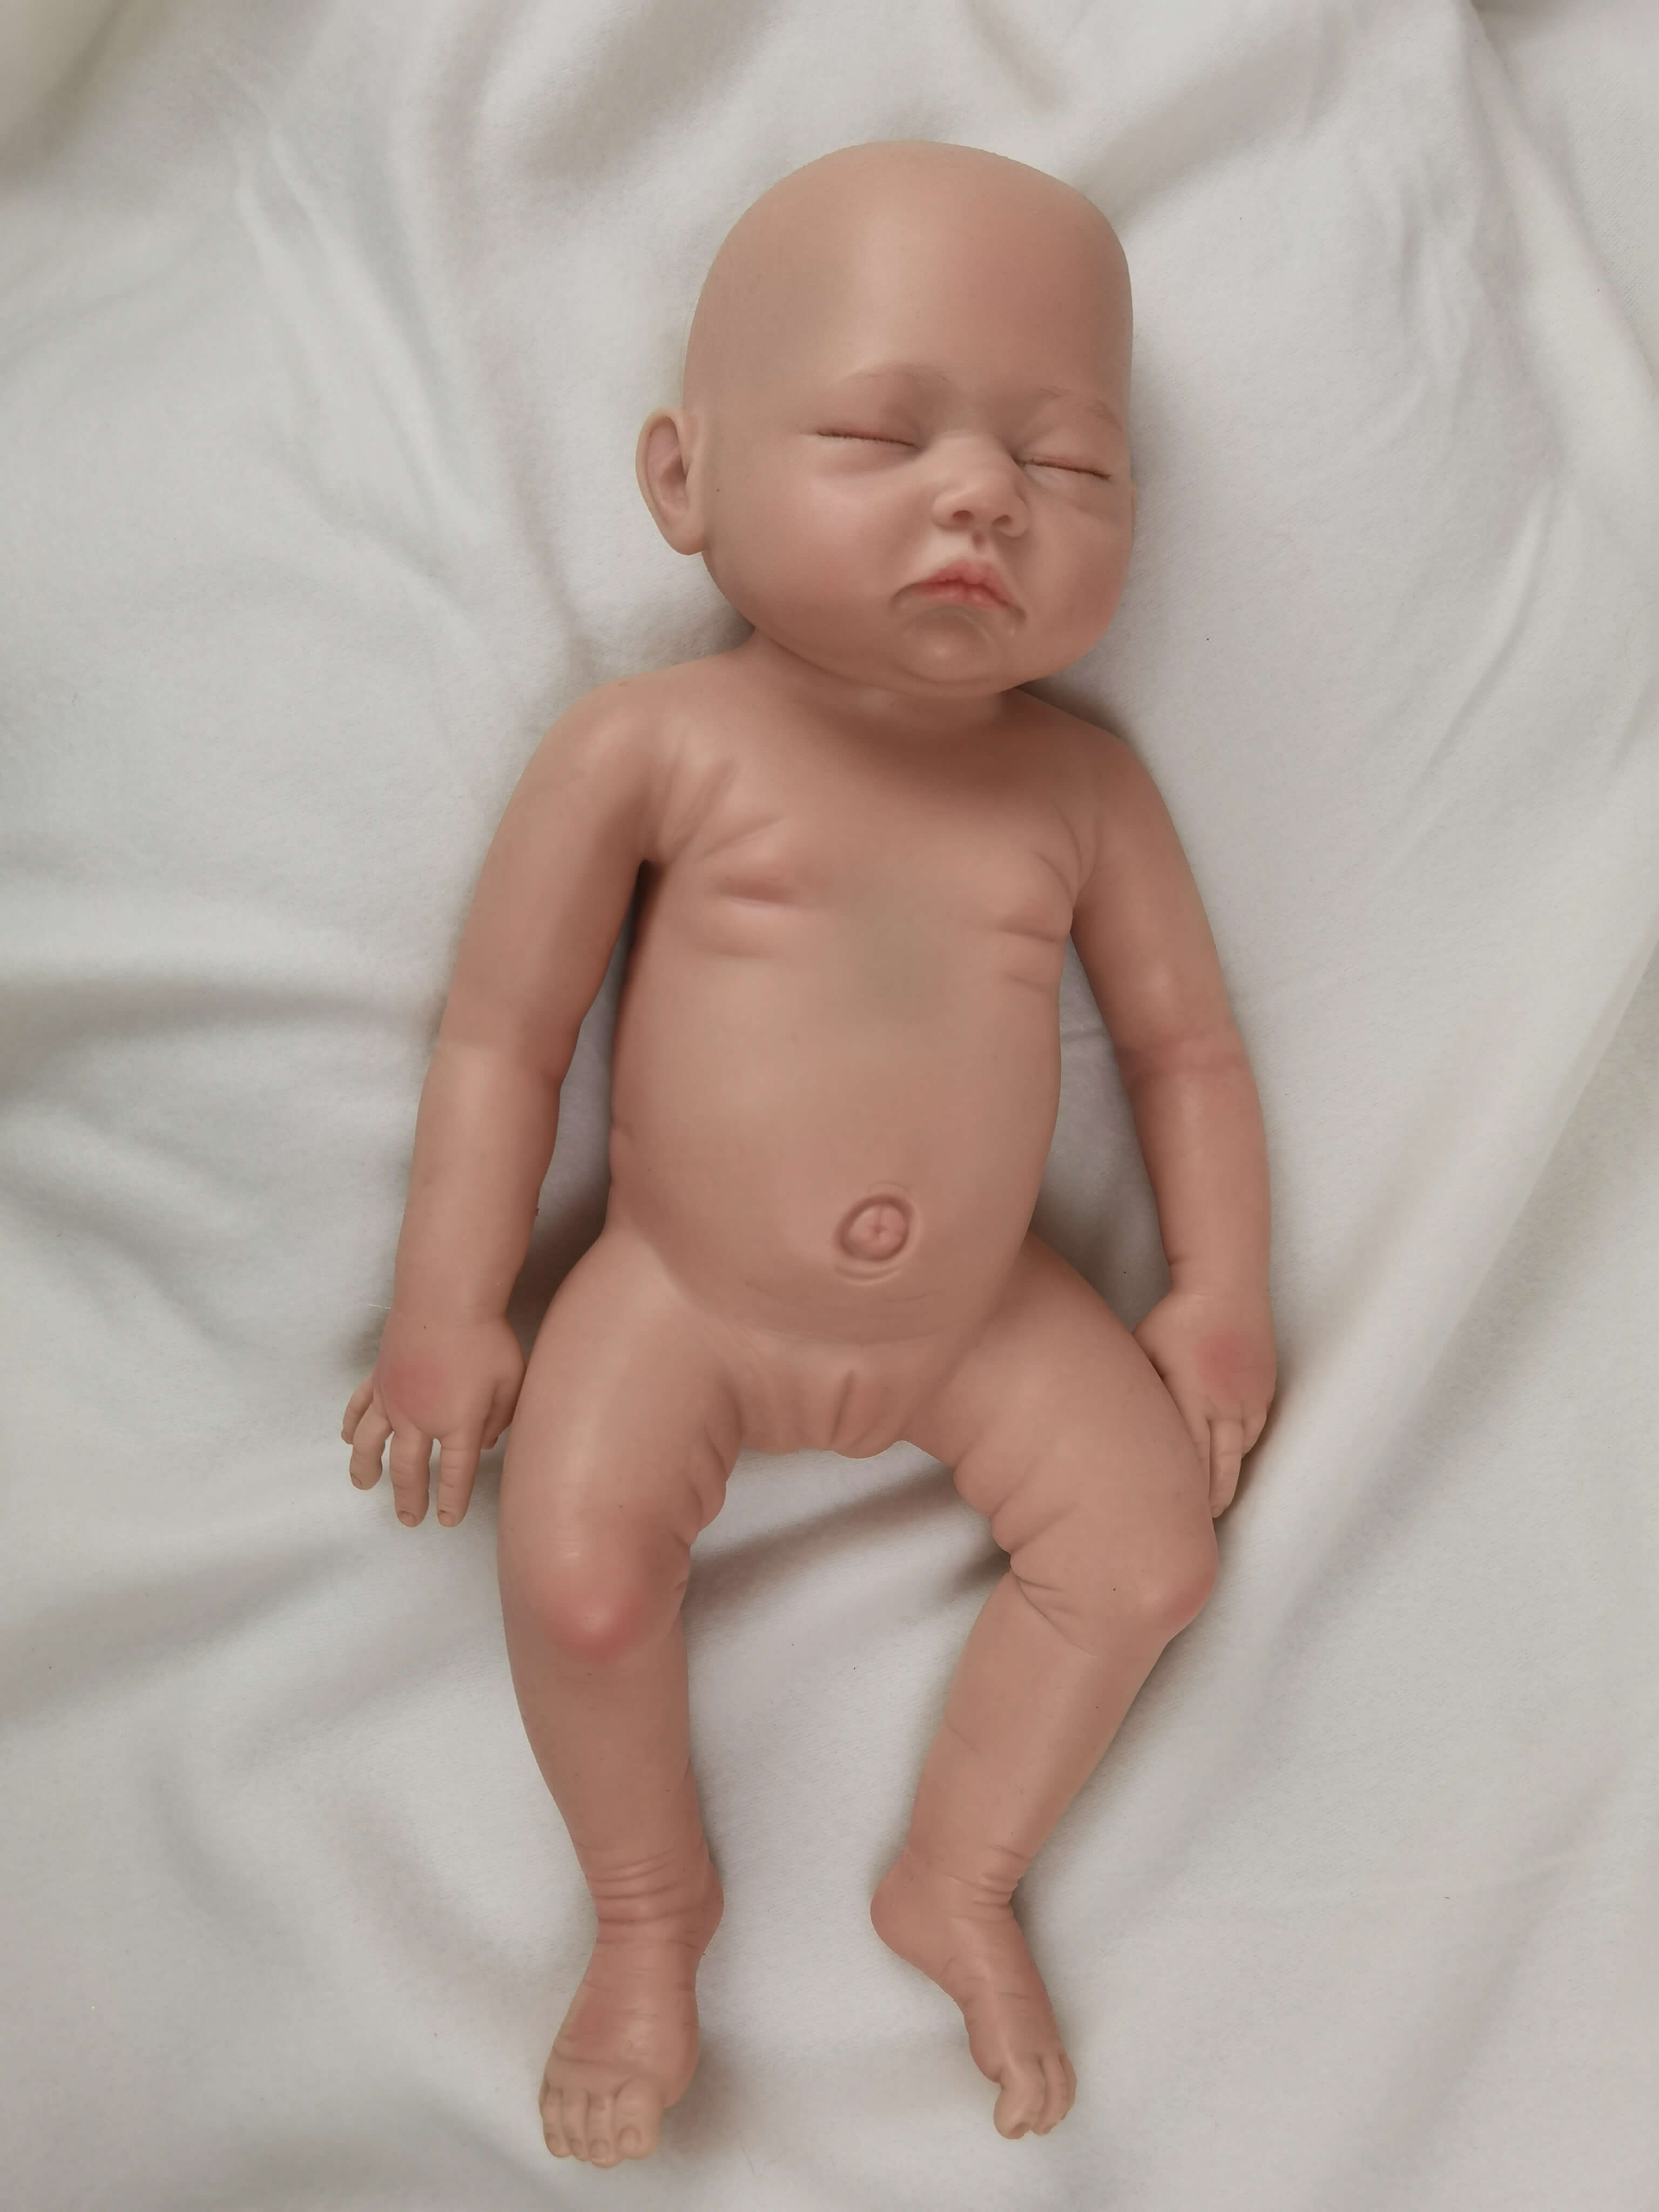 Sleeping Reborn Baby Dolls, 18 Inch Full Silicone Newborn Baby Boy Doll, Realistic Weighted Baby Reborn Toddler Doll for Kids